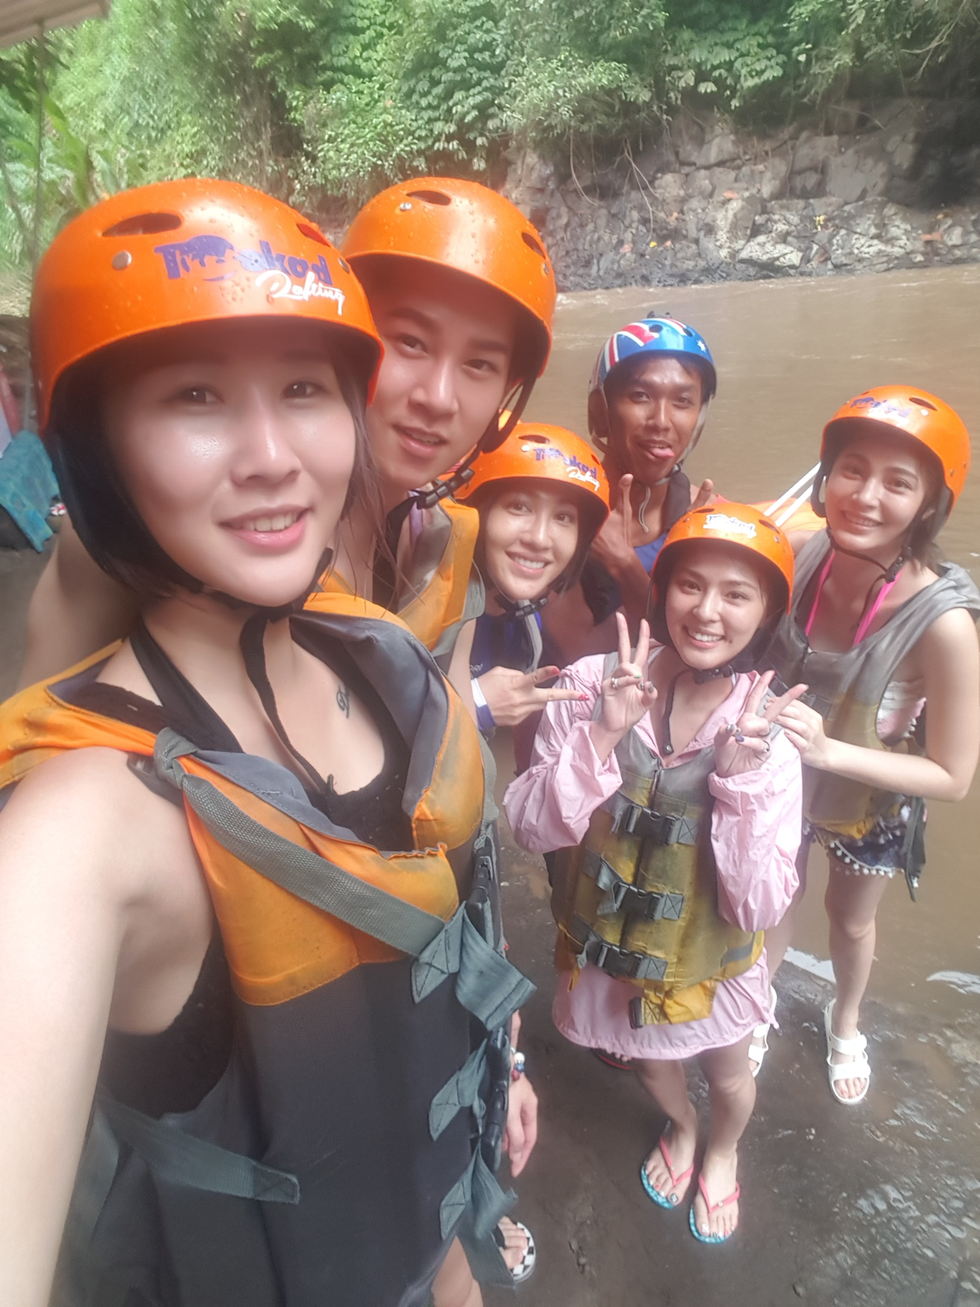 Hard hat, Recreation, Adventure, Personal protective equipment, Fun, Lifejacket, Leisure, Canyoning, 